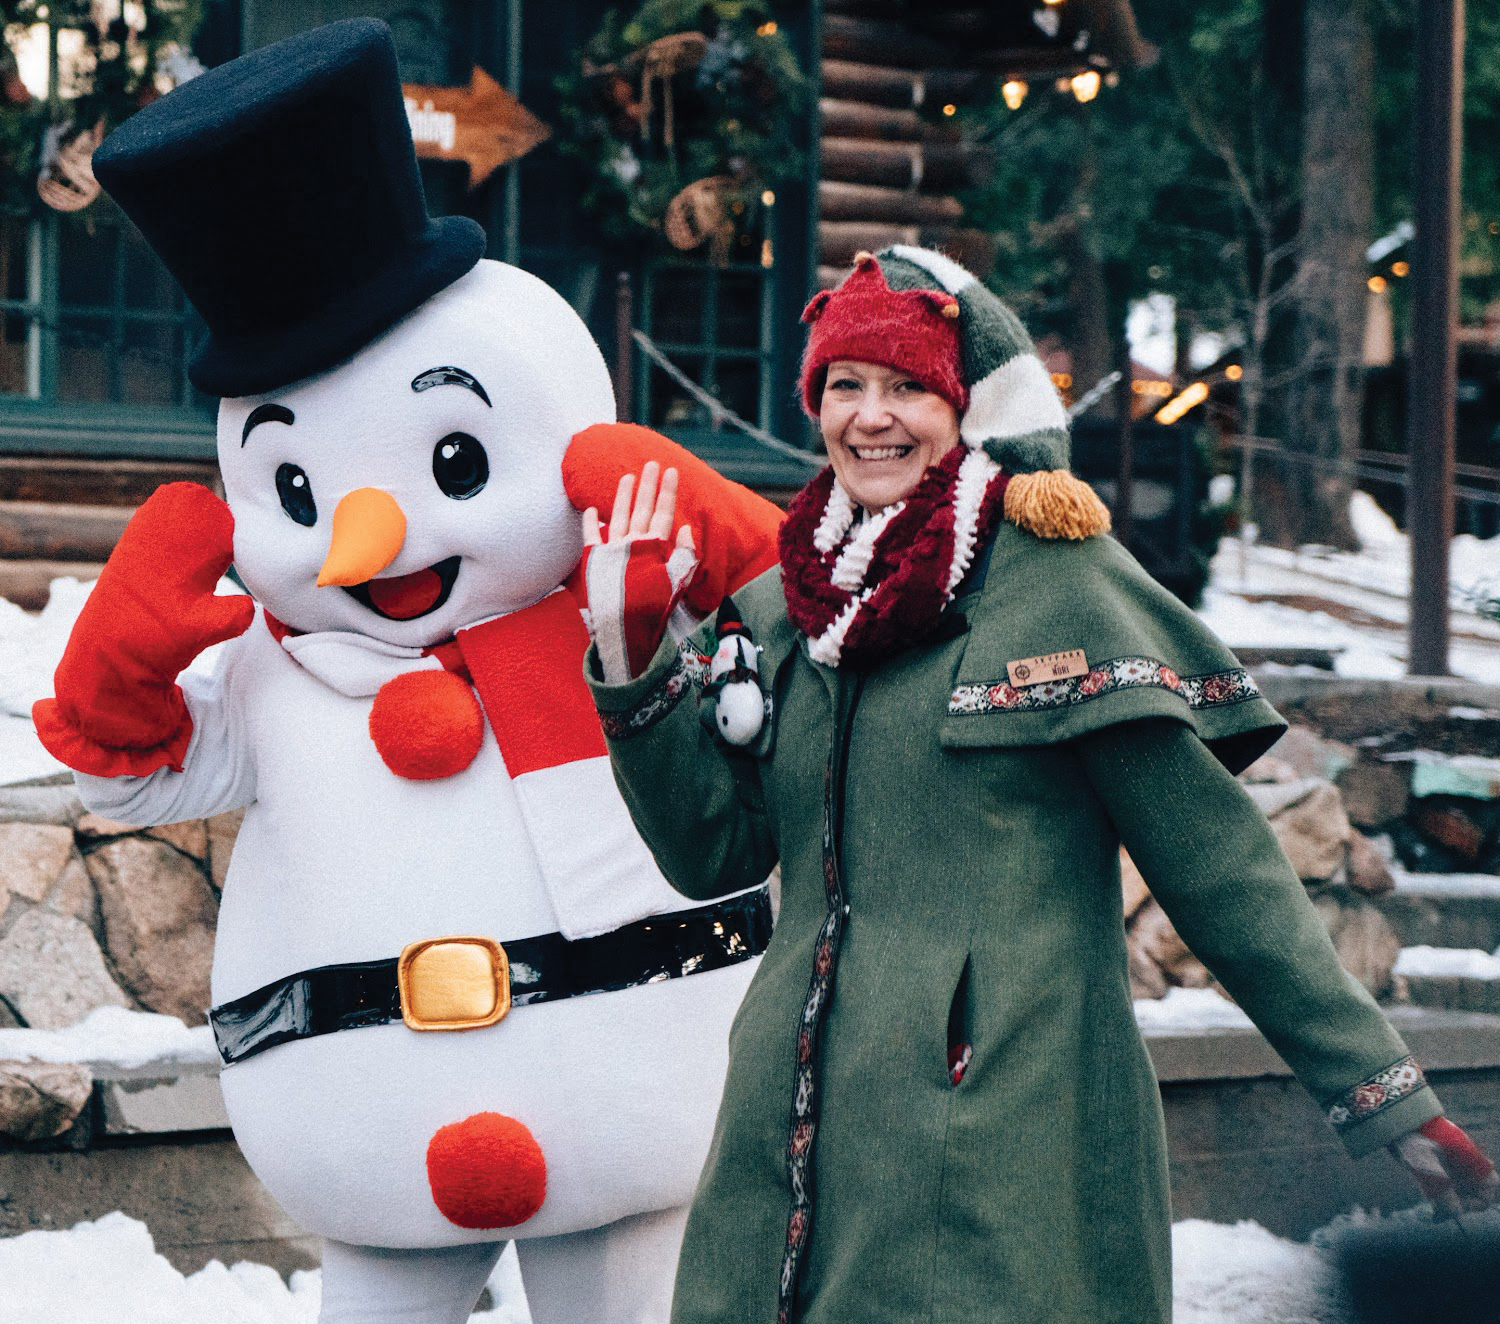 Frosty the Snowman and a SkyPark employee wave to the camera.